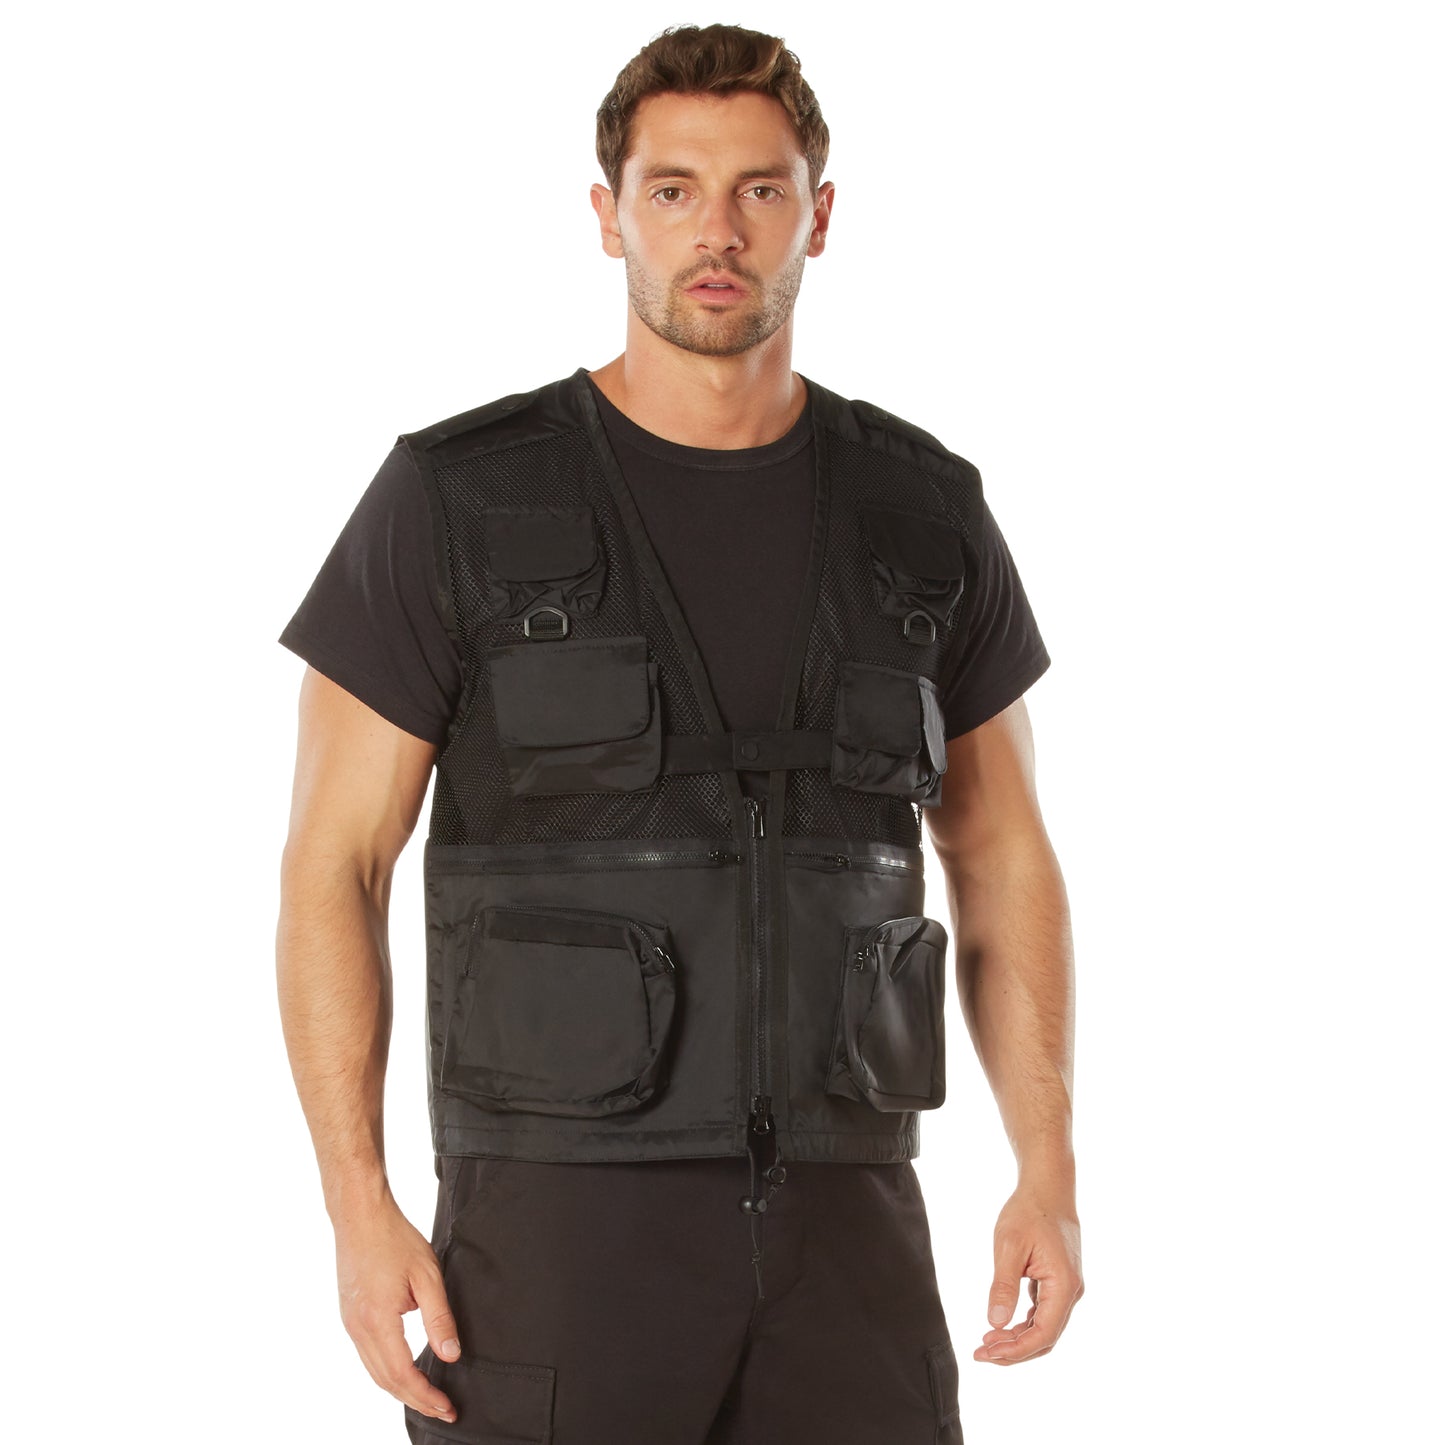 Rothco Tactical Recon Vest